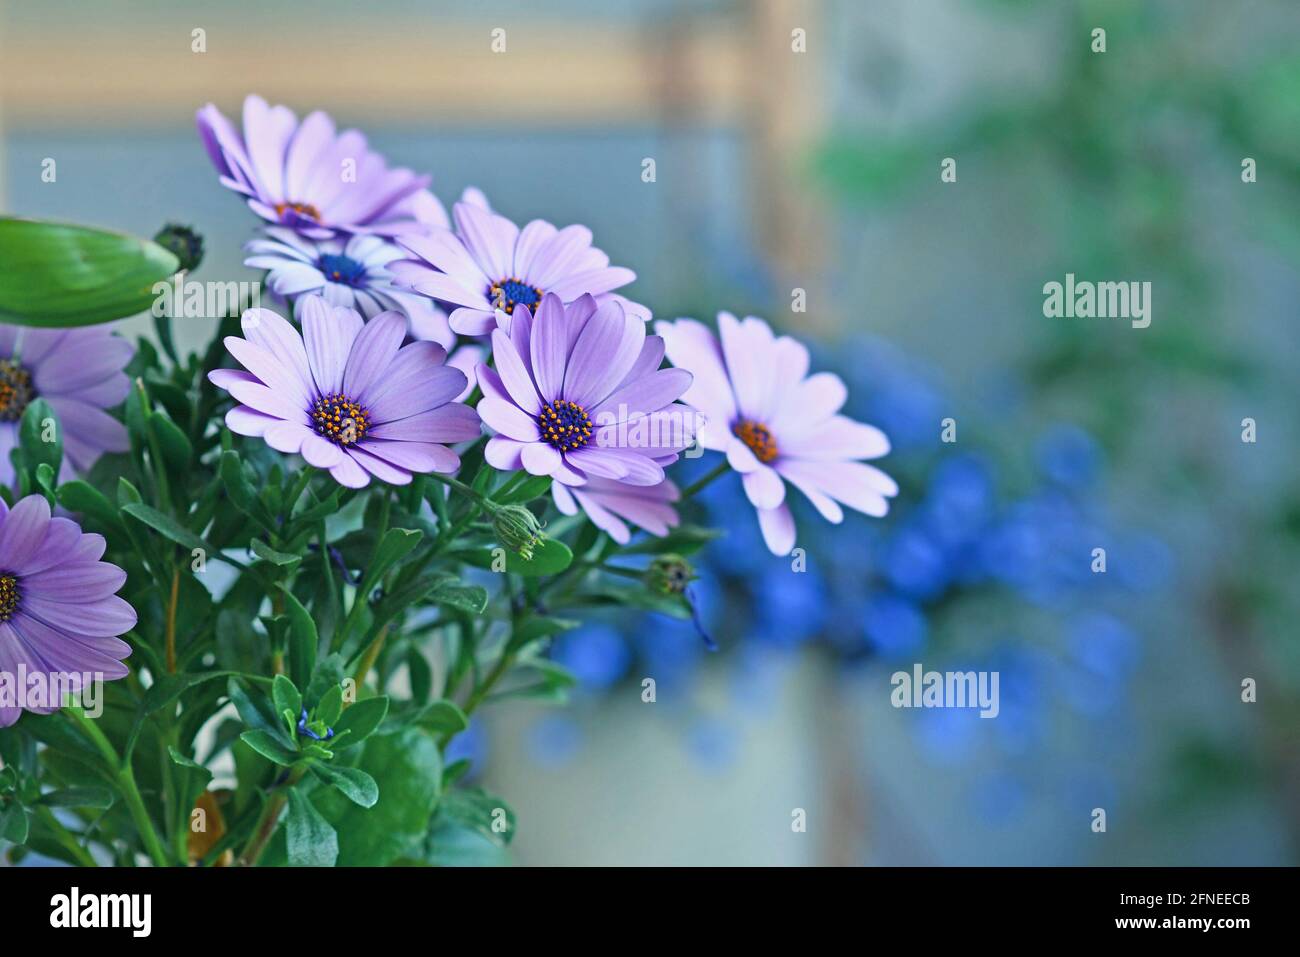 Violet Rain Daisy flowers in front of blurry background with pother plants Stock Photo